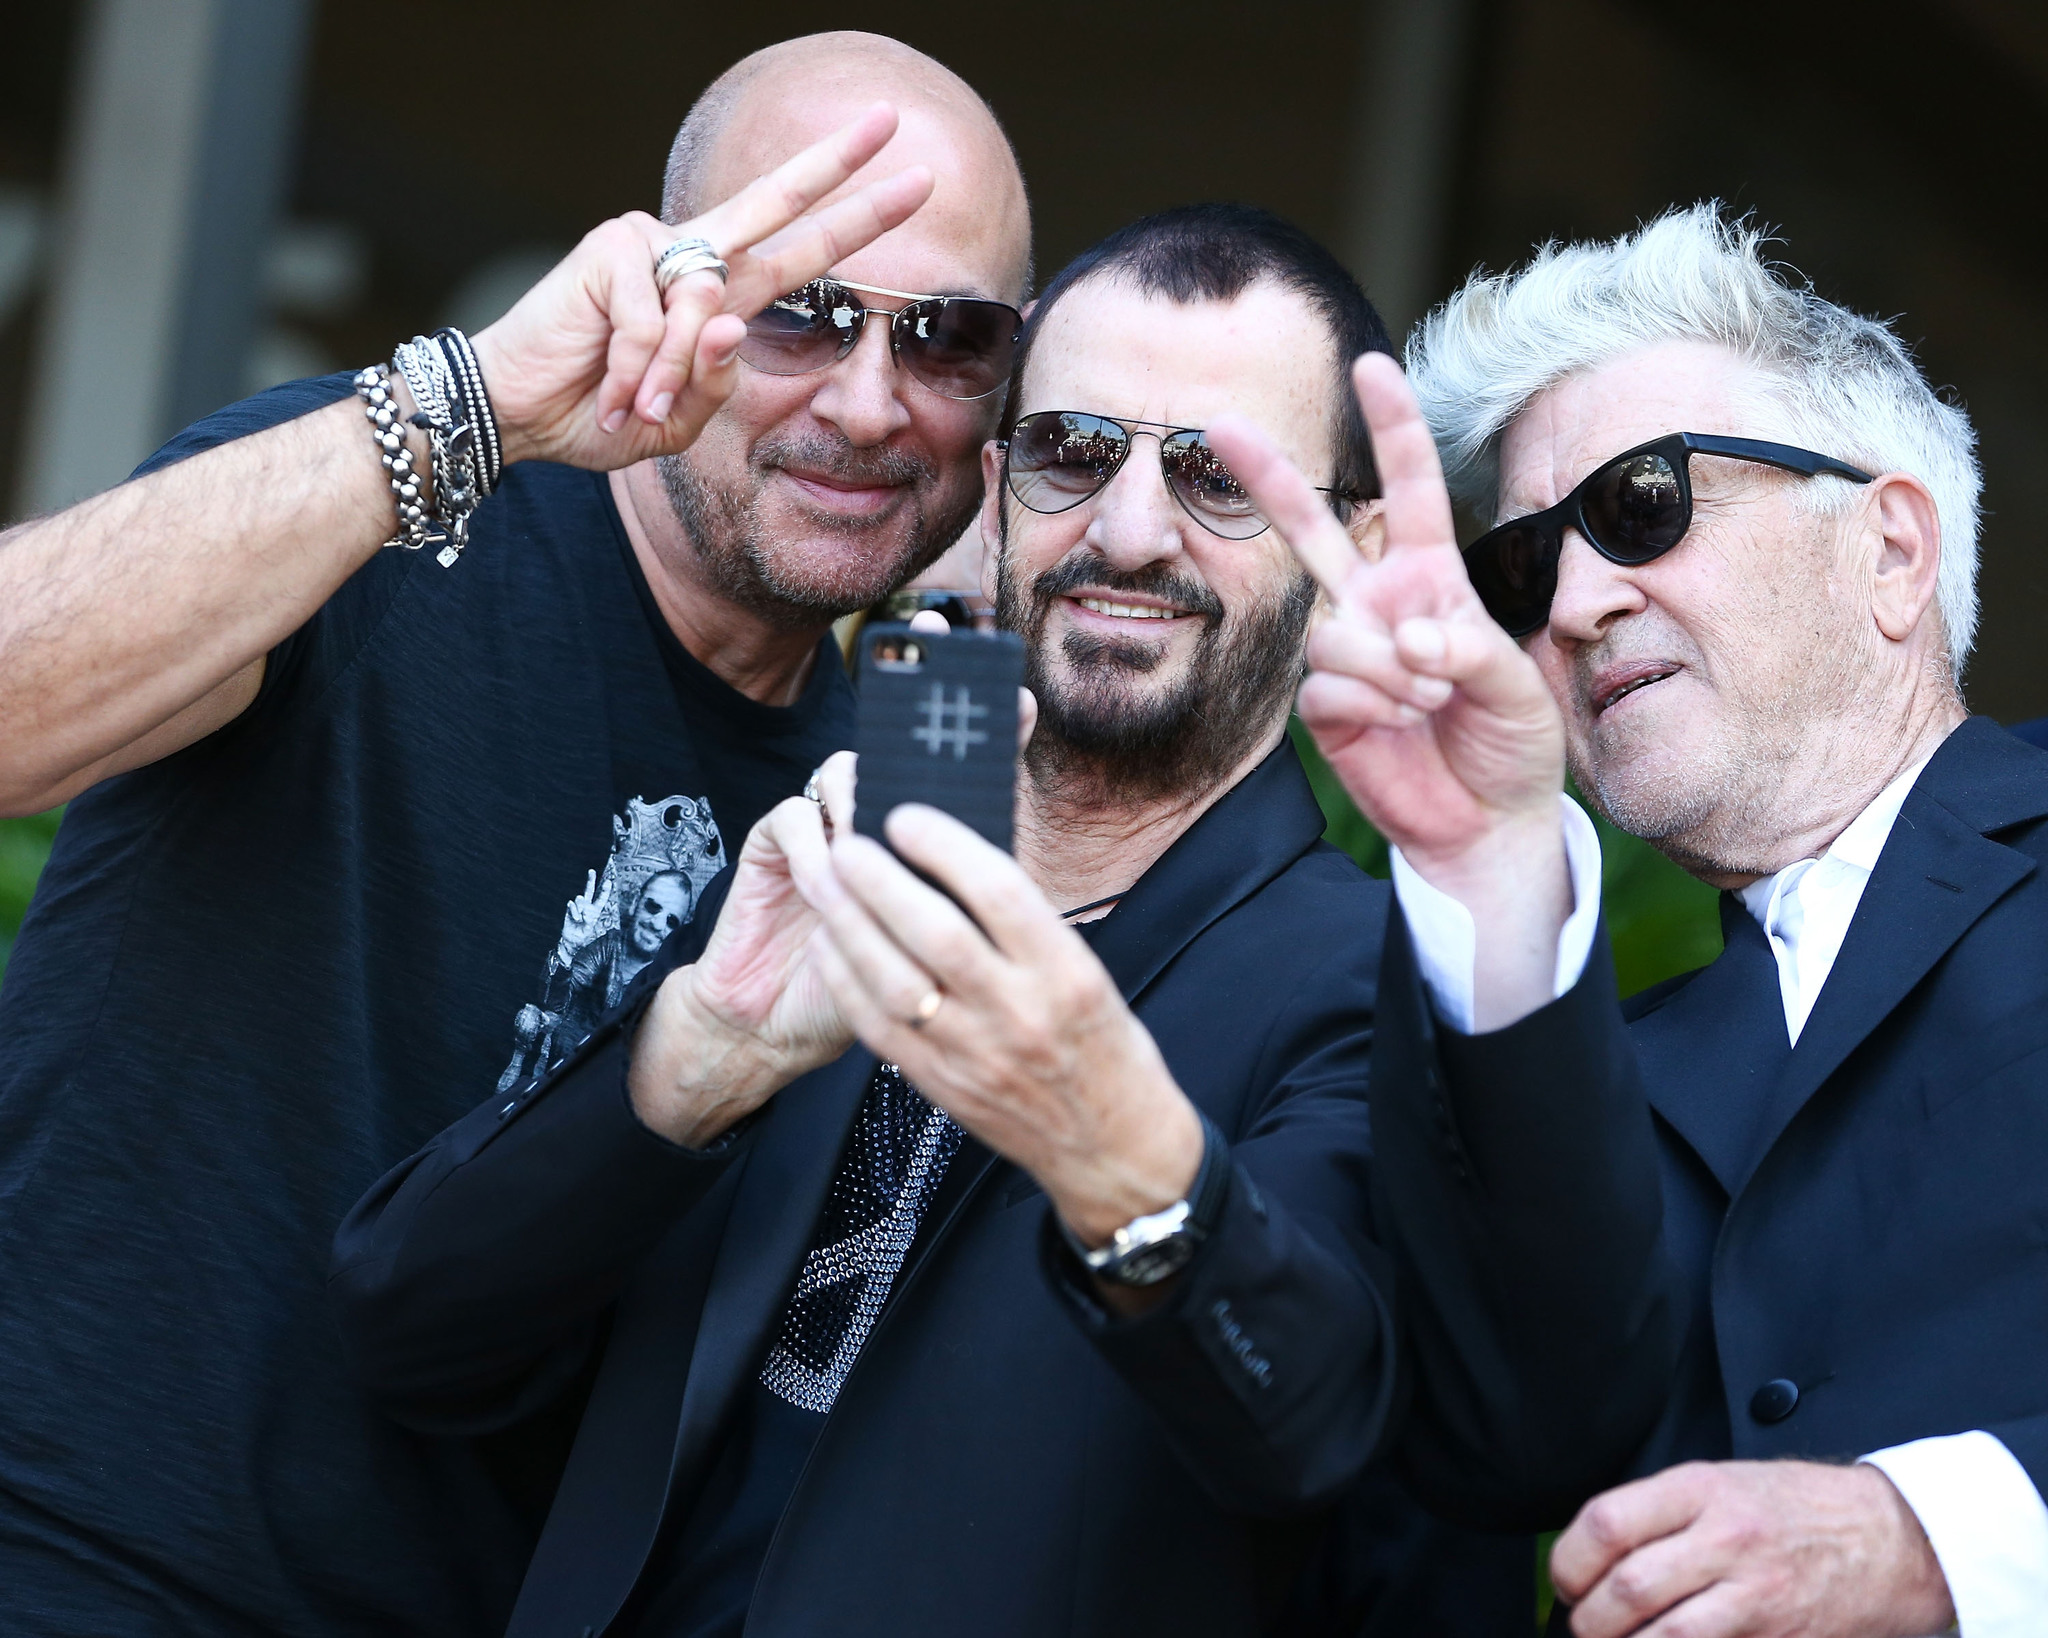 Designer John Varvatos, musician Ringo Starr, and director David Lynch attend the announcement of special collaboration of John Varvatos and Ringo Starr on occasion of Ringo's birthday at Capitol Records Studio on July 7, 2014 in Hollywood, California.